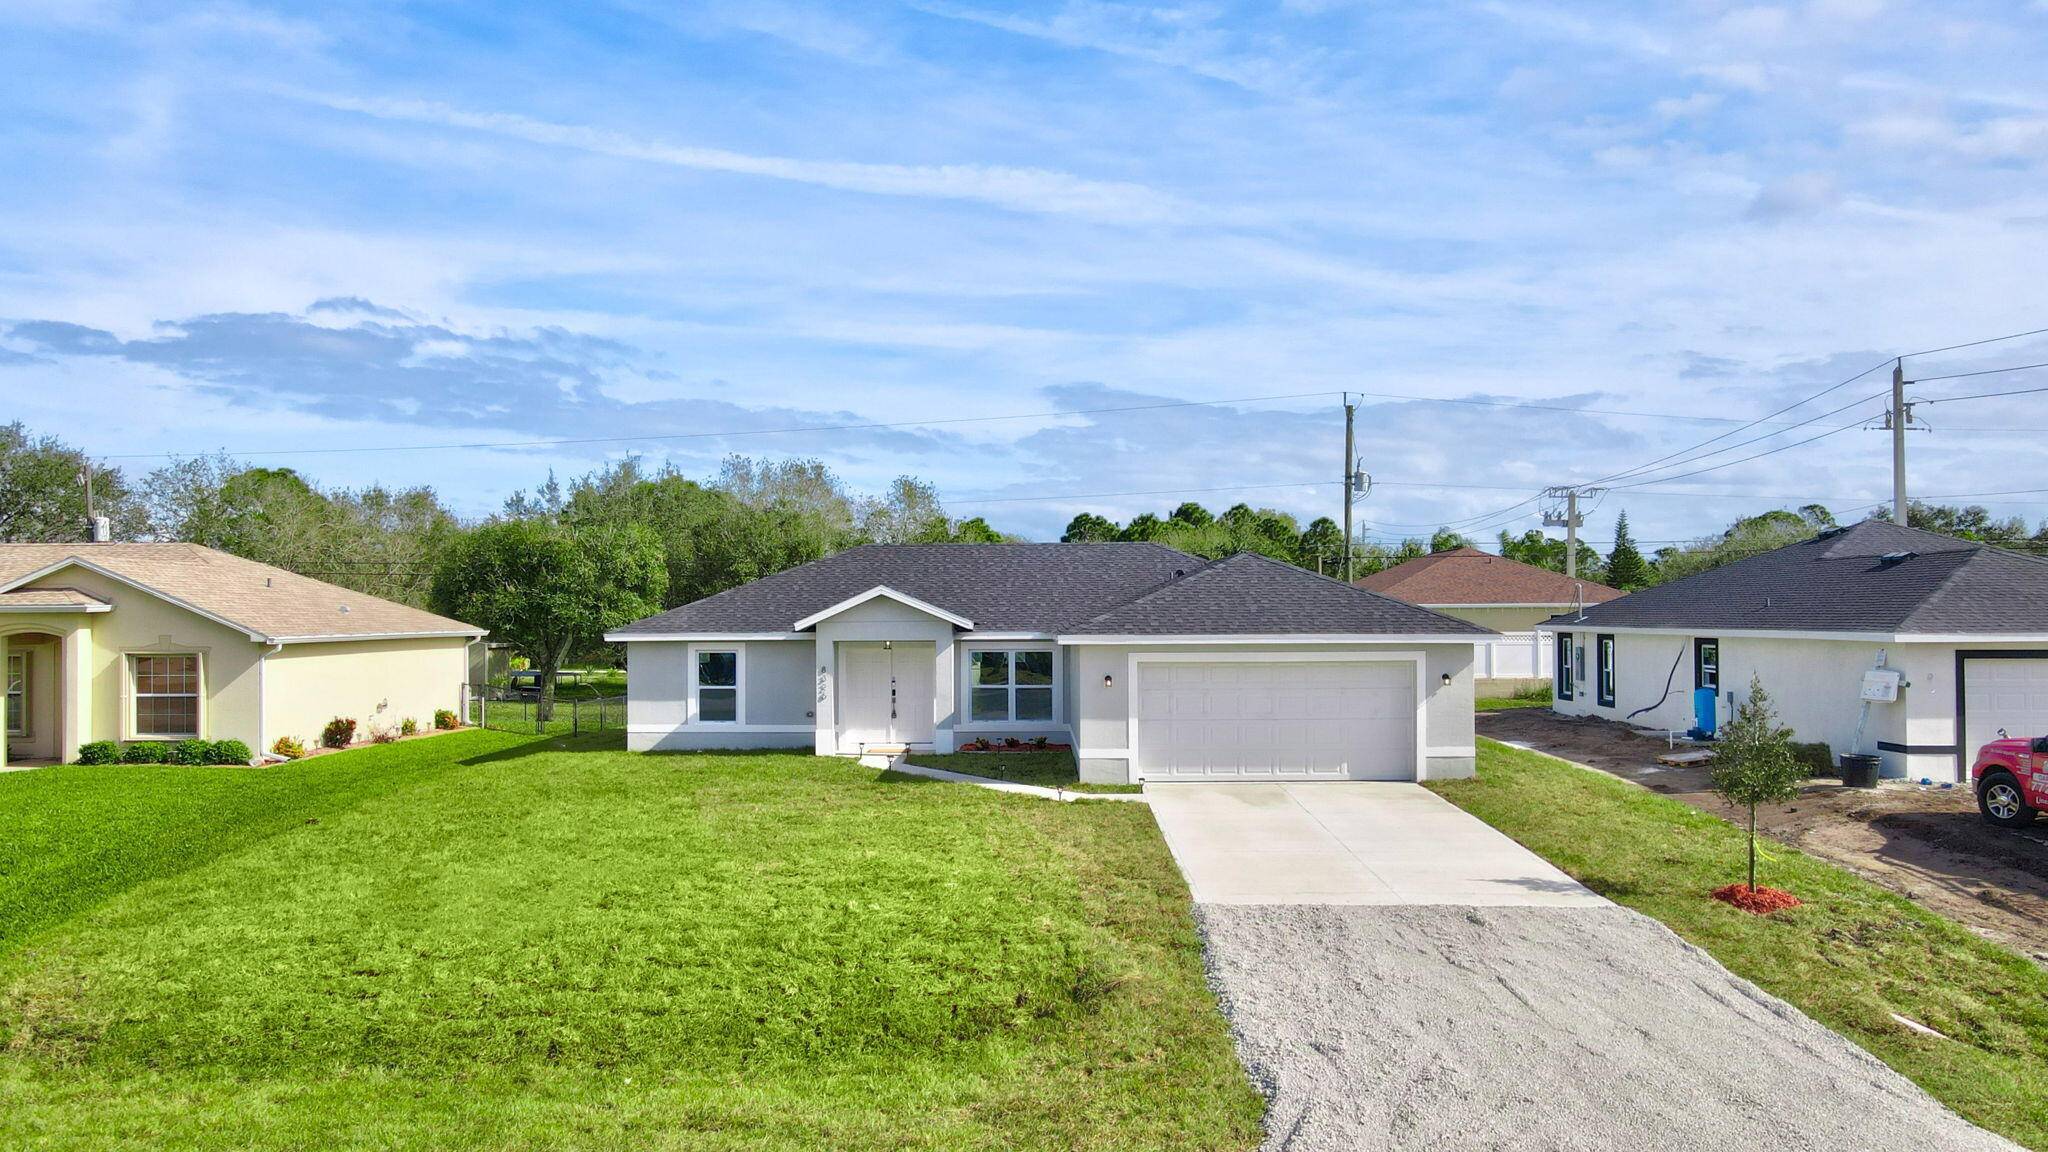 This newly constructed single family home is nestled on a spacious lot, its proximity to highways provides convenient access.